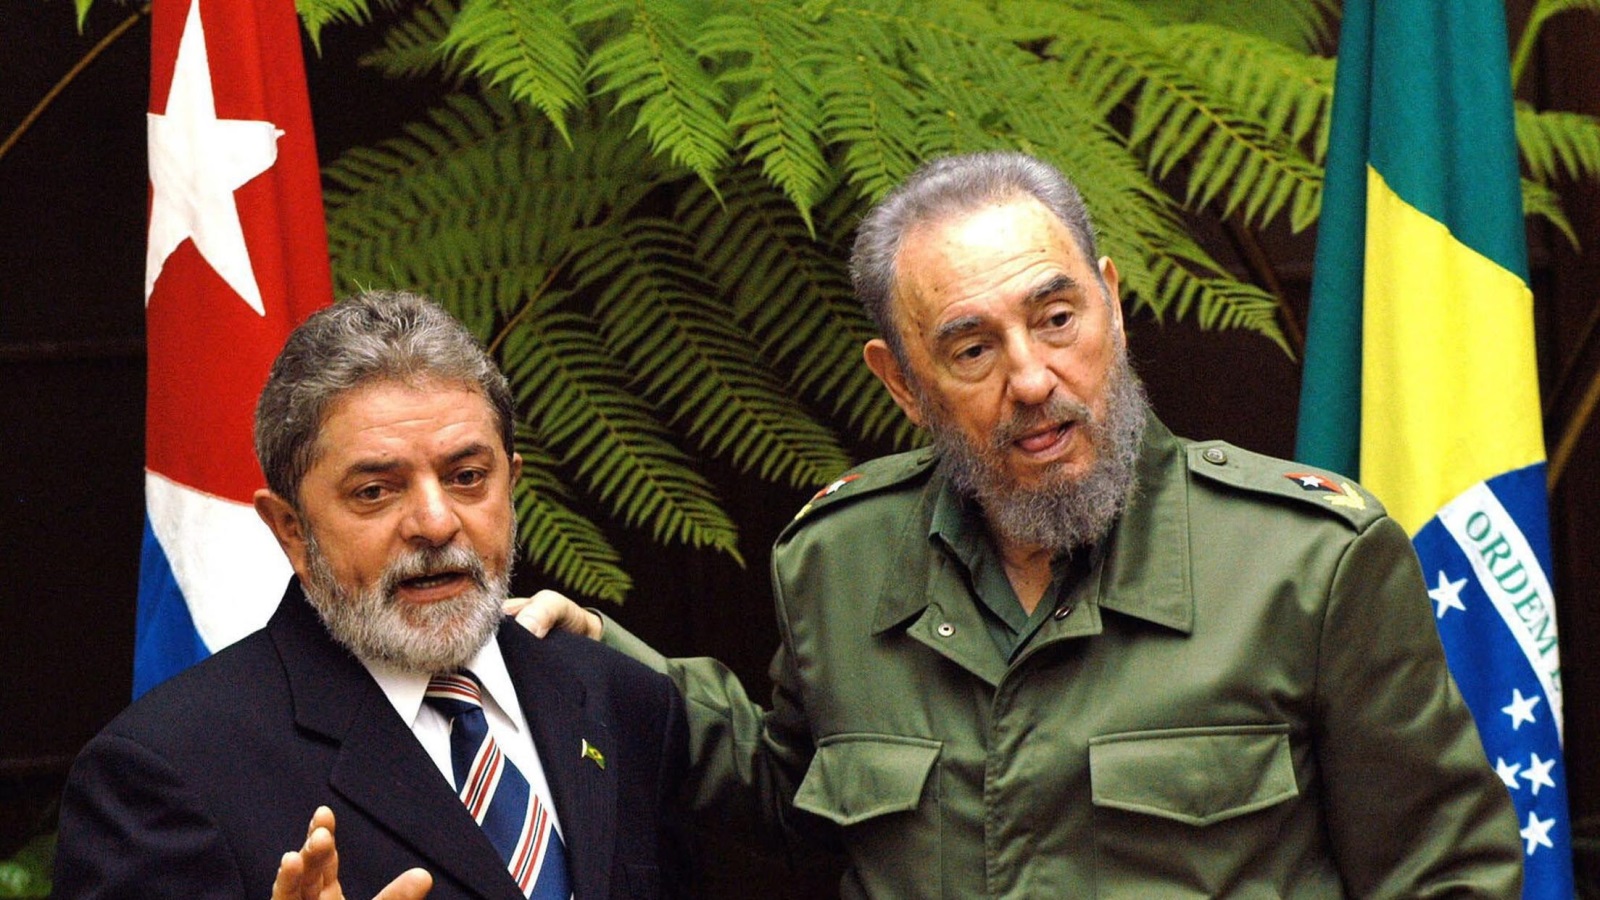 (FILE) A file picture dated 26 September 2003 shows Cuban President Fidel Castro (R) and his Brazilian counterpart Luiz Inacio Lula da Silva (L) as they pose for an official photo prior to a meeting to discuss official issues, at the Revolution Palace in Havana City, Cuba. According to a Cuban state TV broadcast, Cuban former President Fidel Castro has died at the age of 90 on 25 November 2016.